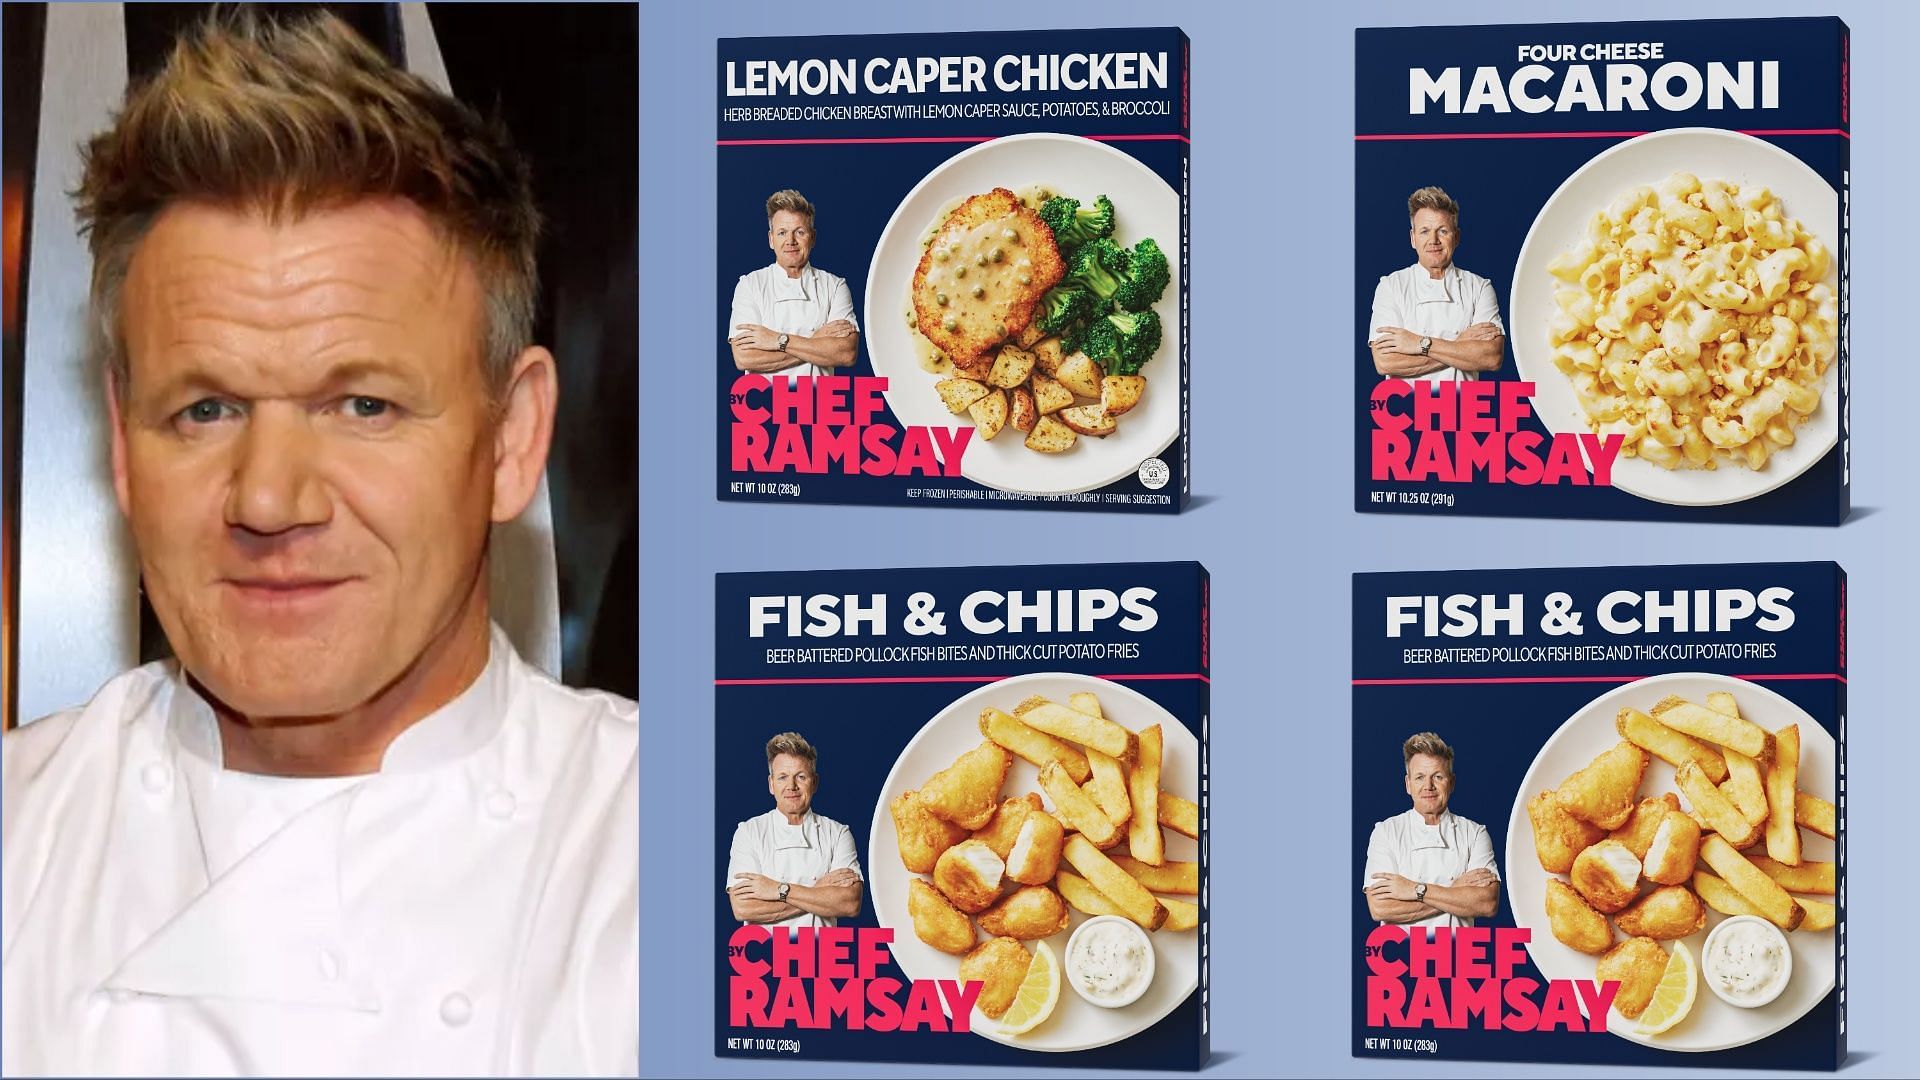 Gordon Ramsay Frozen Food Line: Offerings, price, and all you need to know